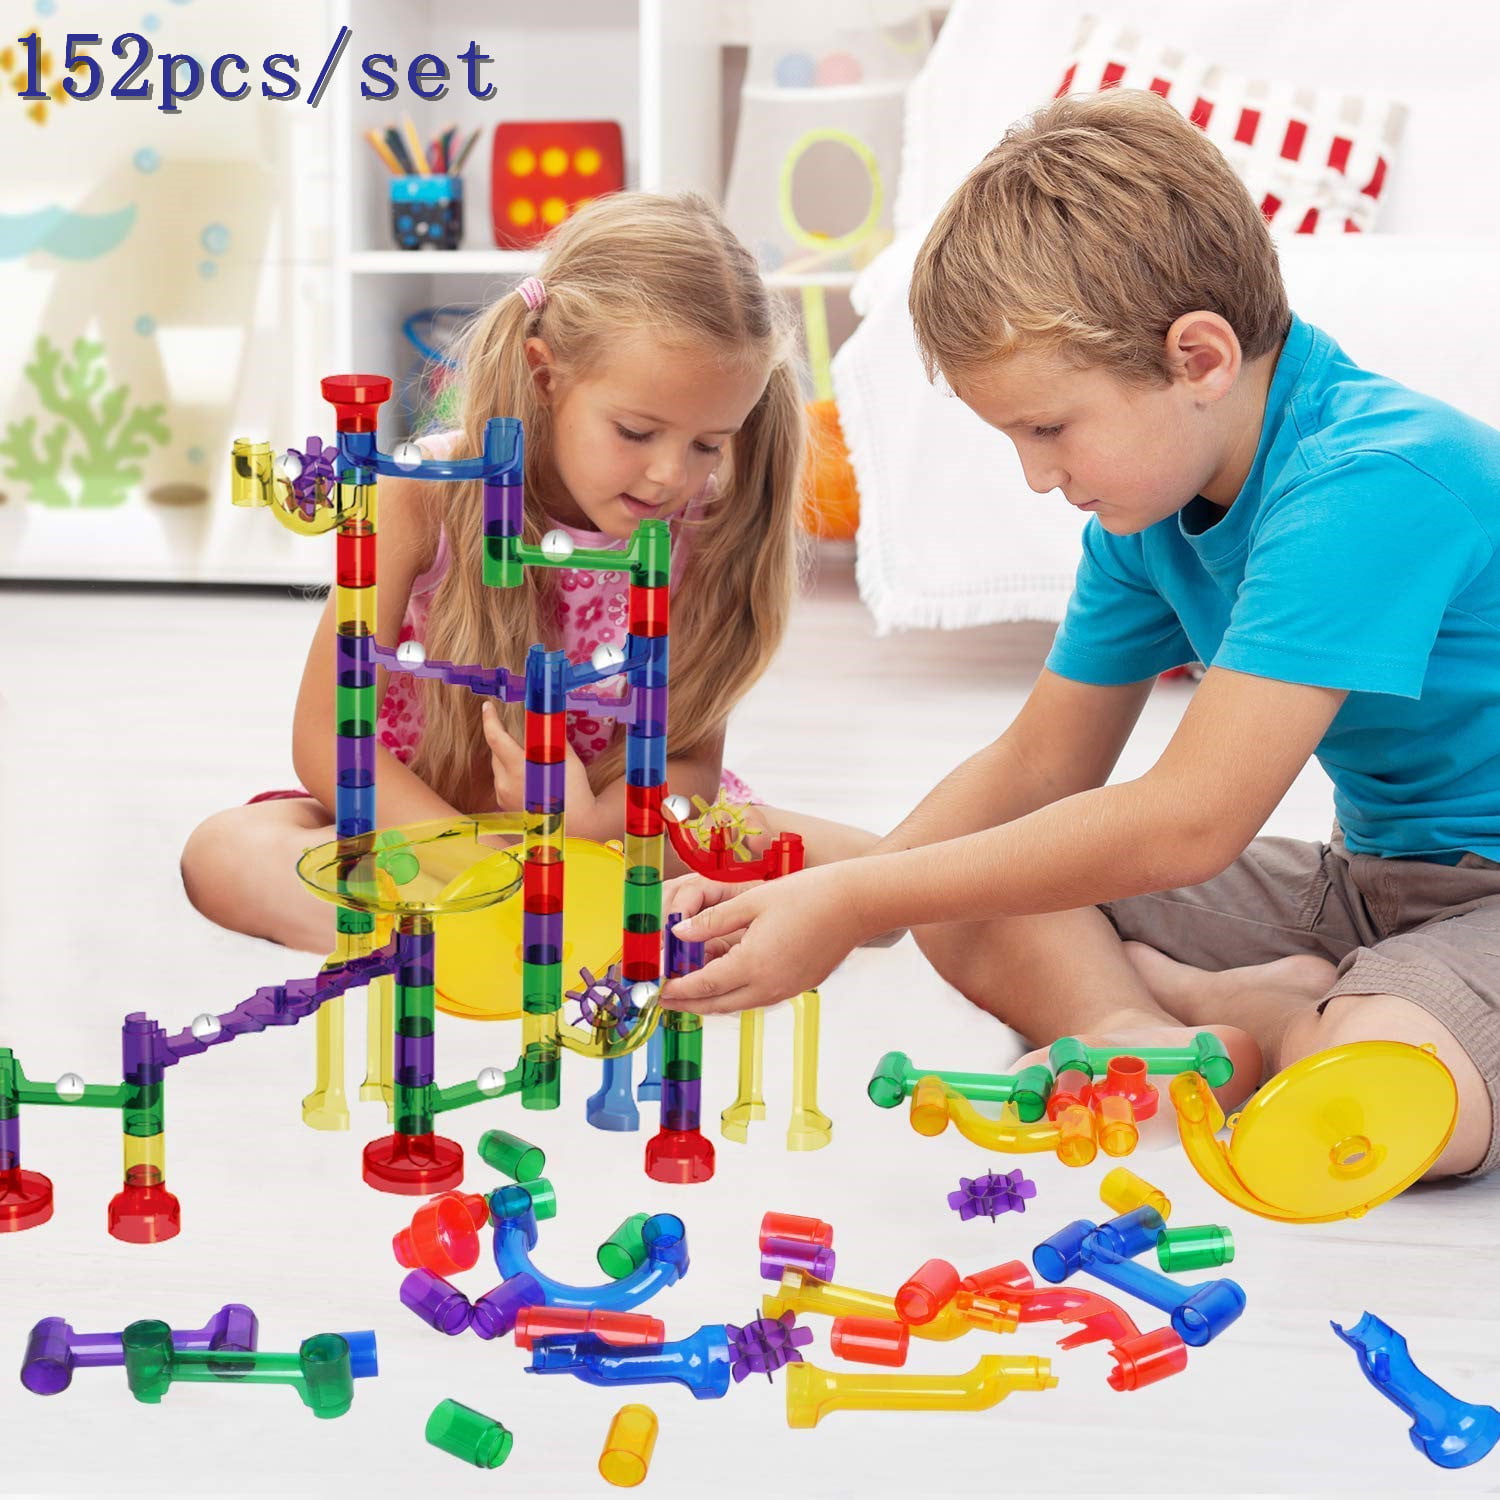 152 Pcs Marble Runs Toy Marble Maze Race Track Game Set, Ucradle Marble Run 